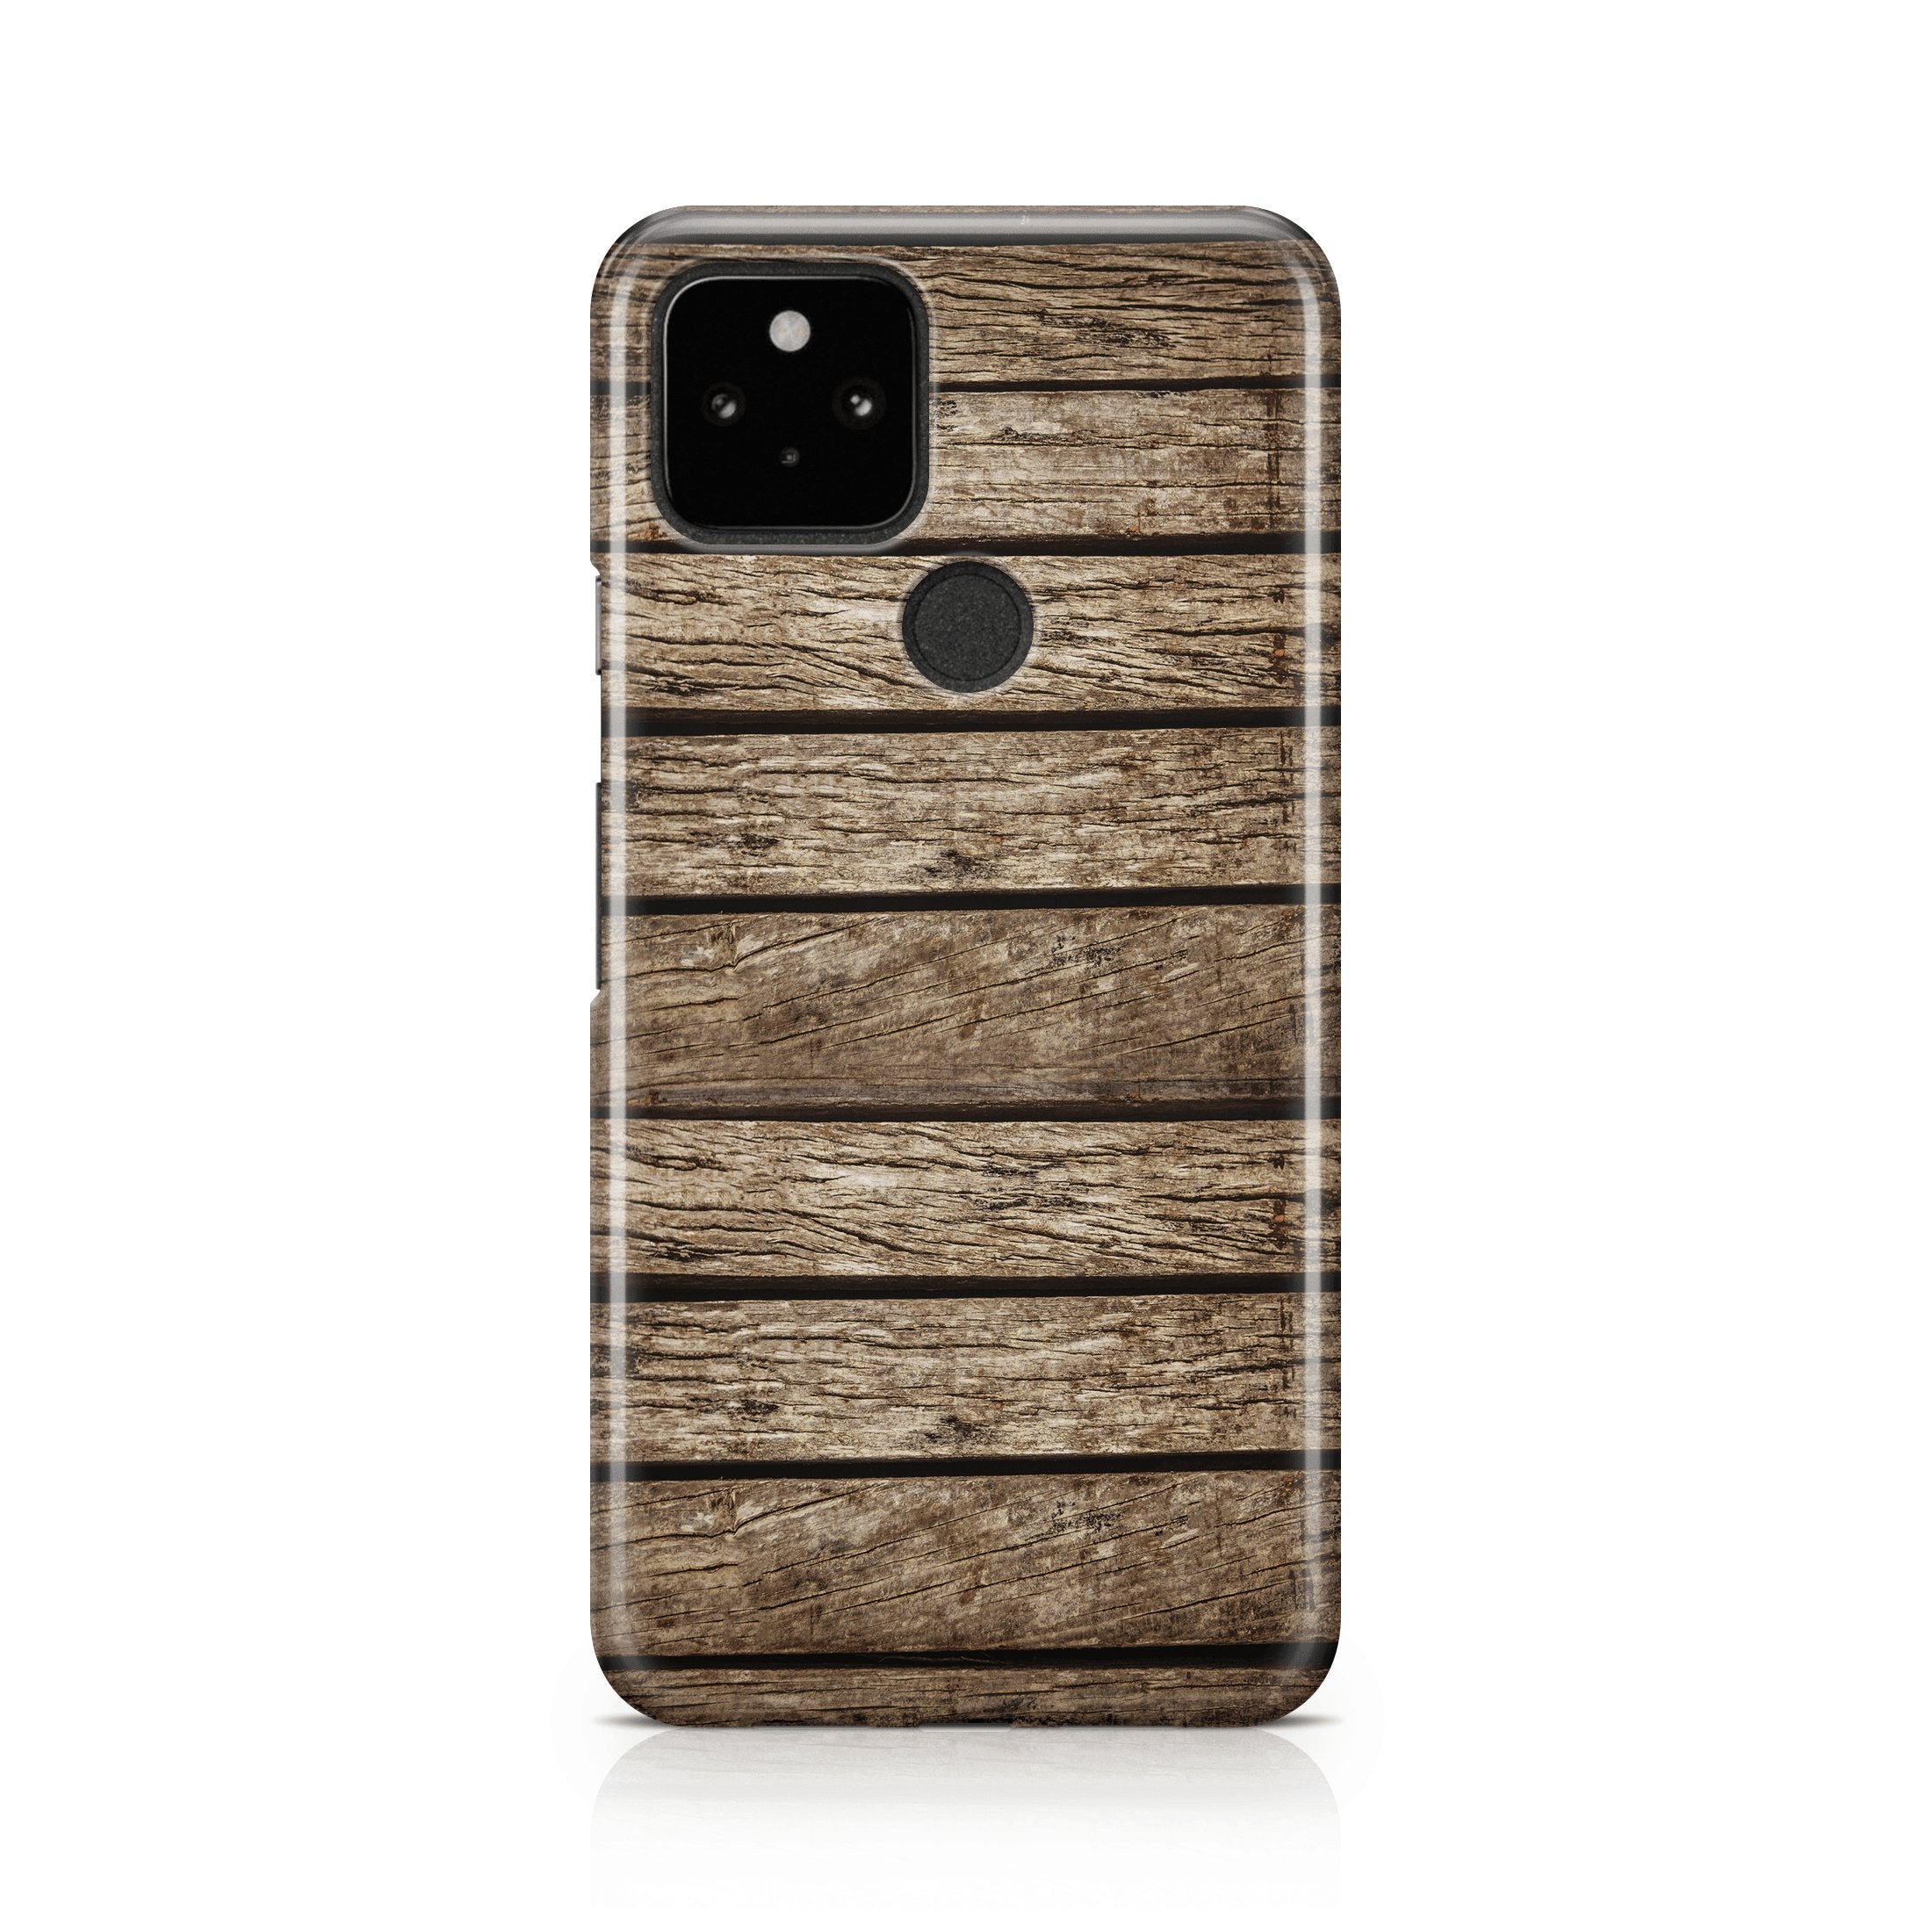 Rustic Cabin - Google phone case designs by CaseSwagger